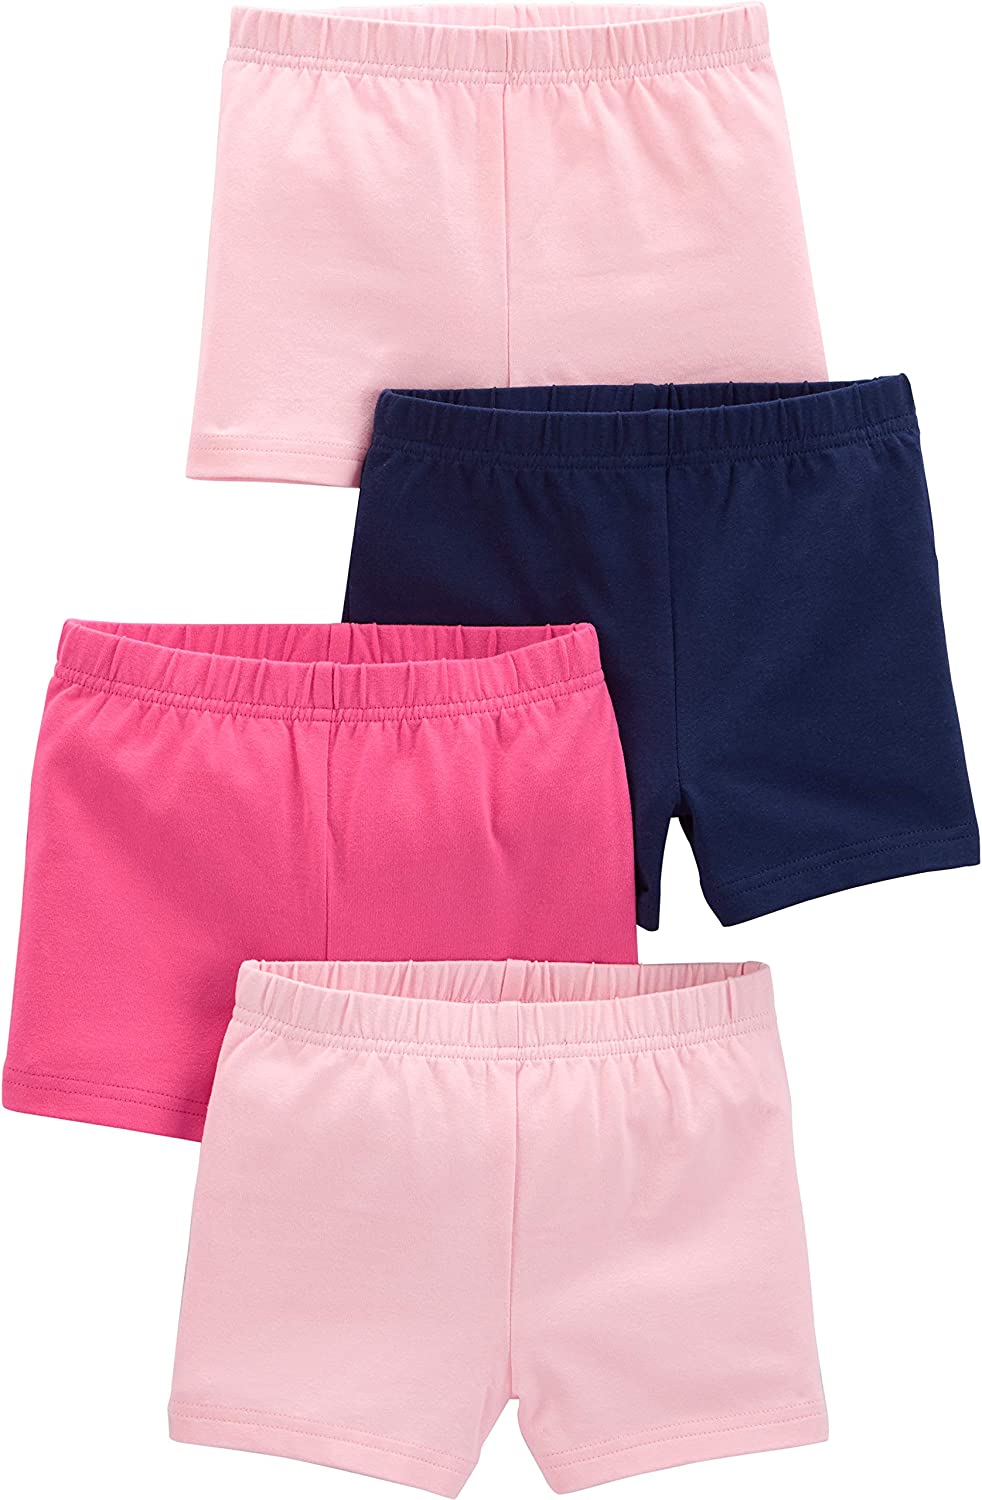 Simple Joys by Carters Toddler Girls 3-Pack Knit Shorts 